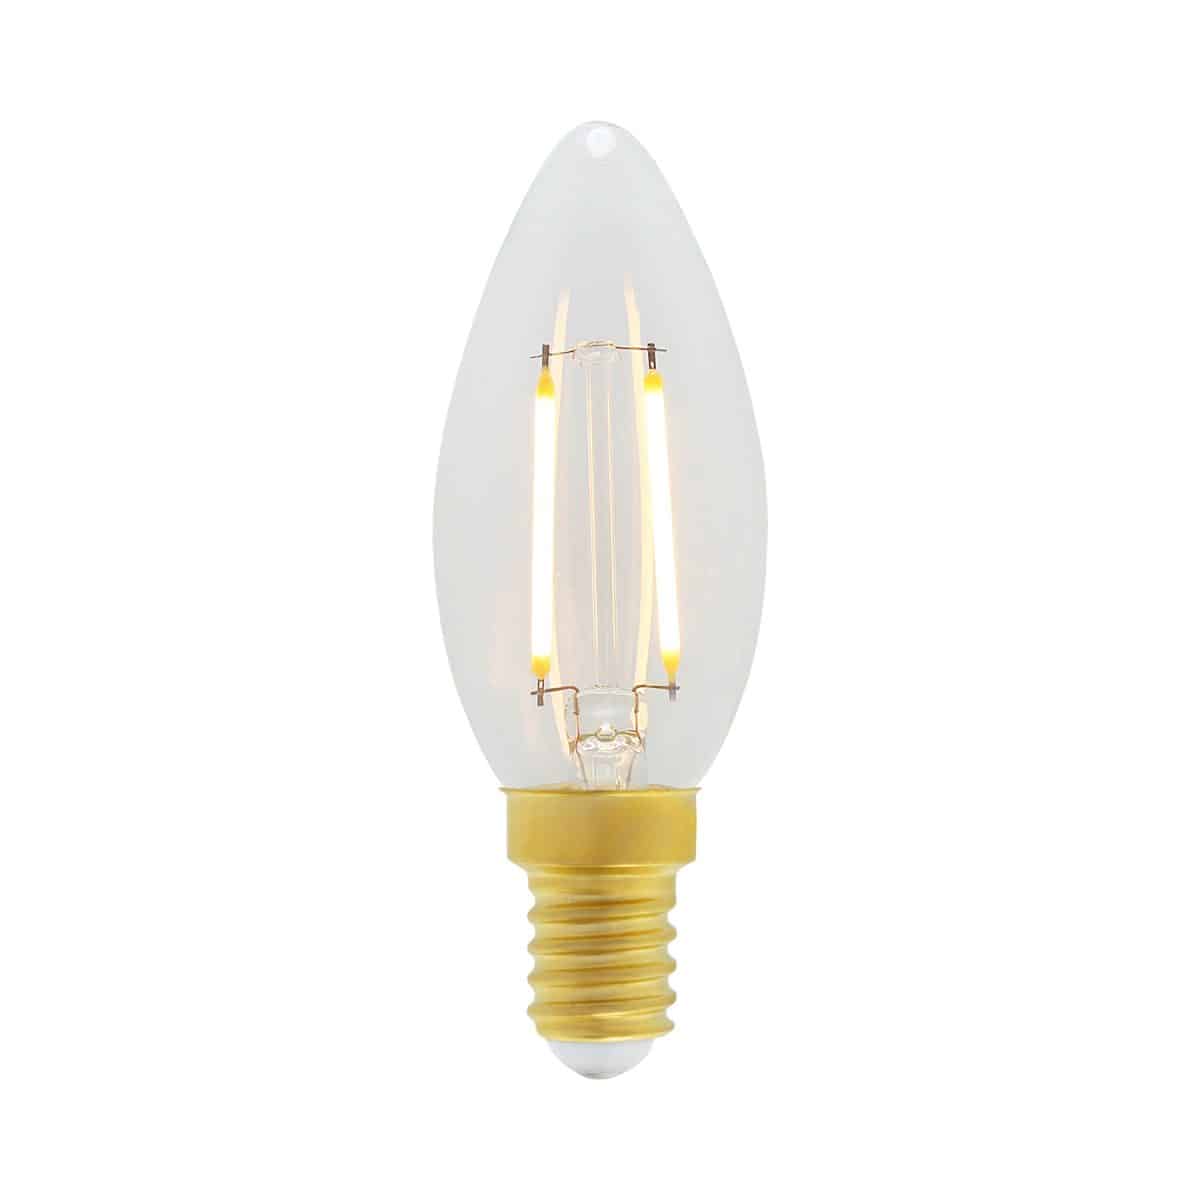 1.5watt Candle LED SES E14 Small Screw Cap Very Warm White Clear Dimmable